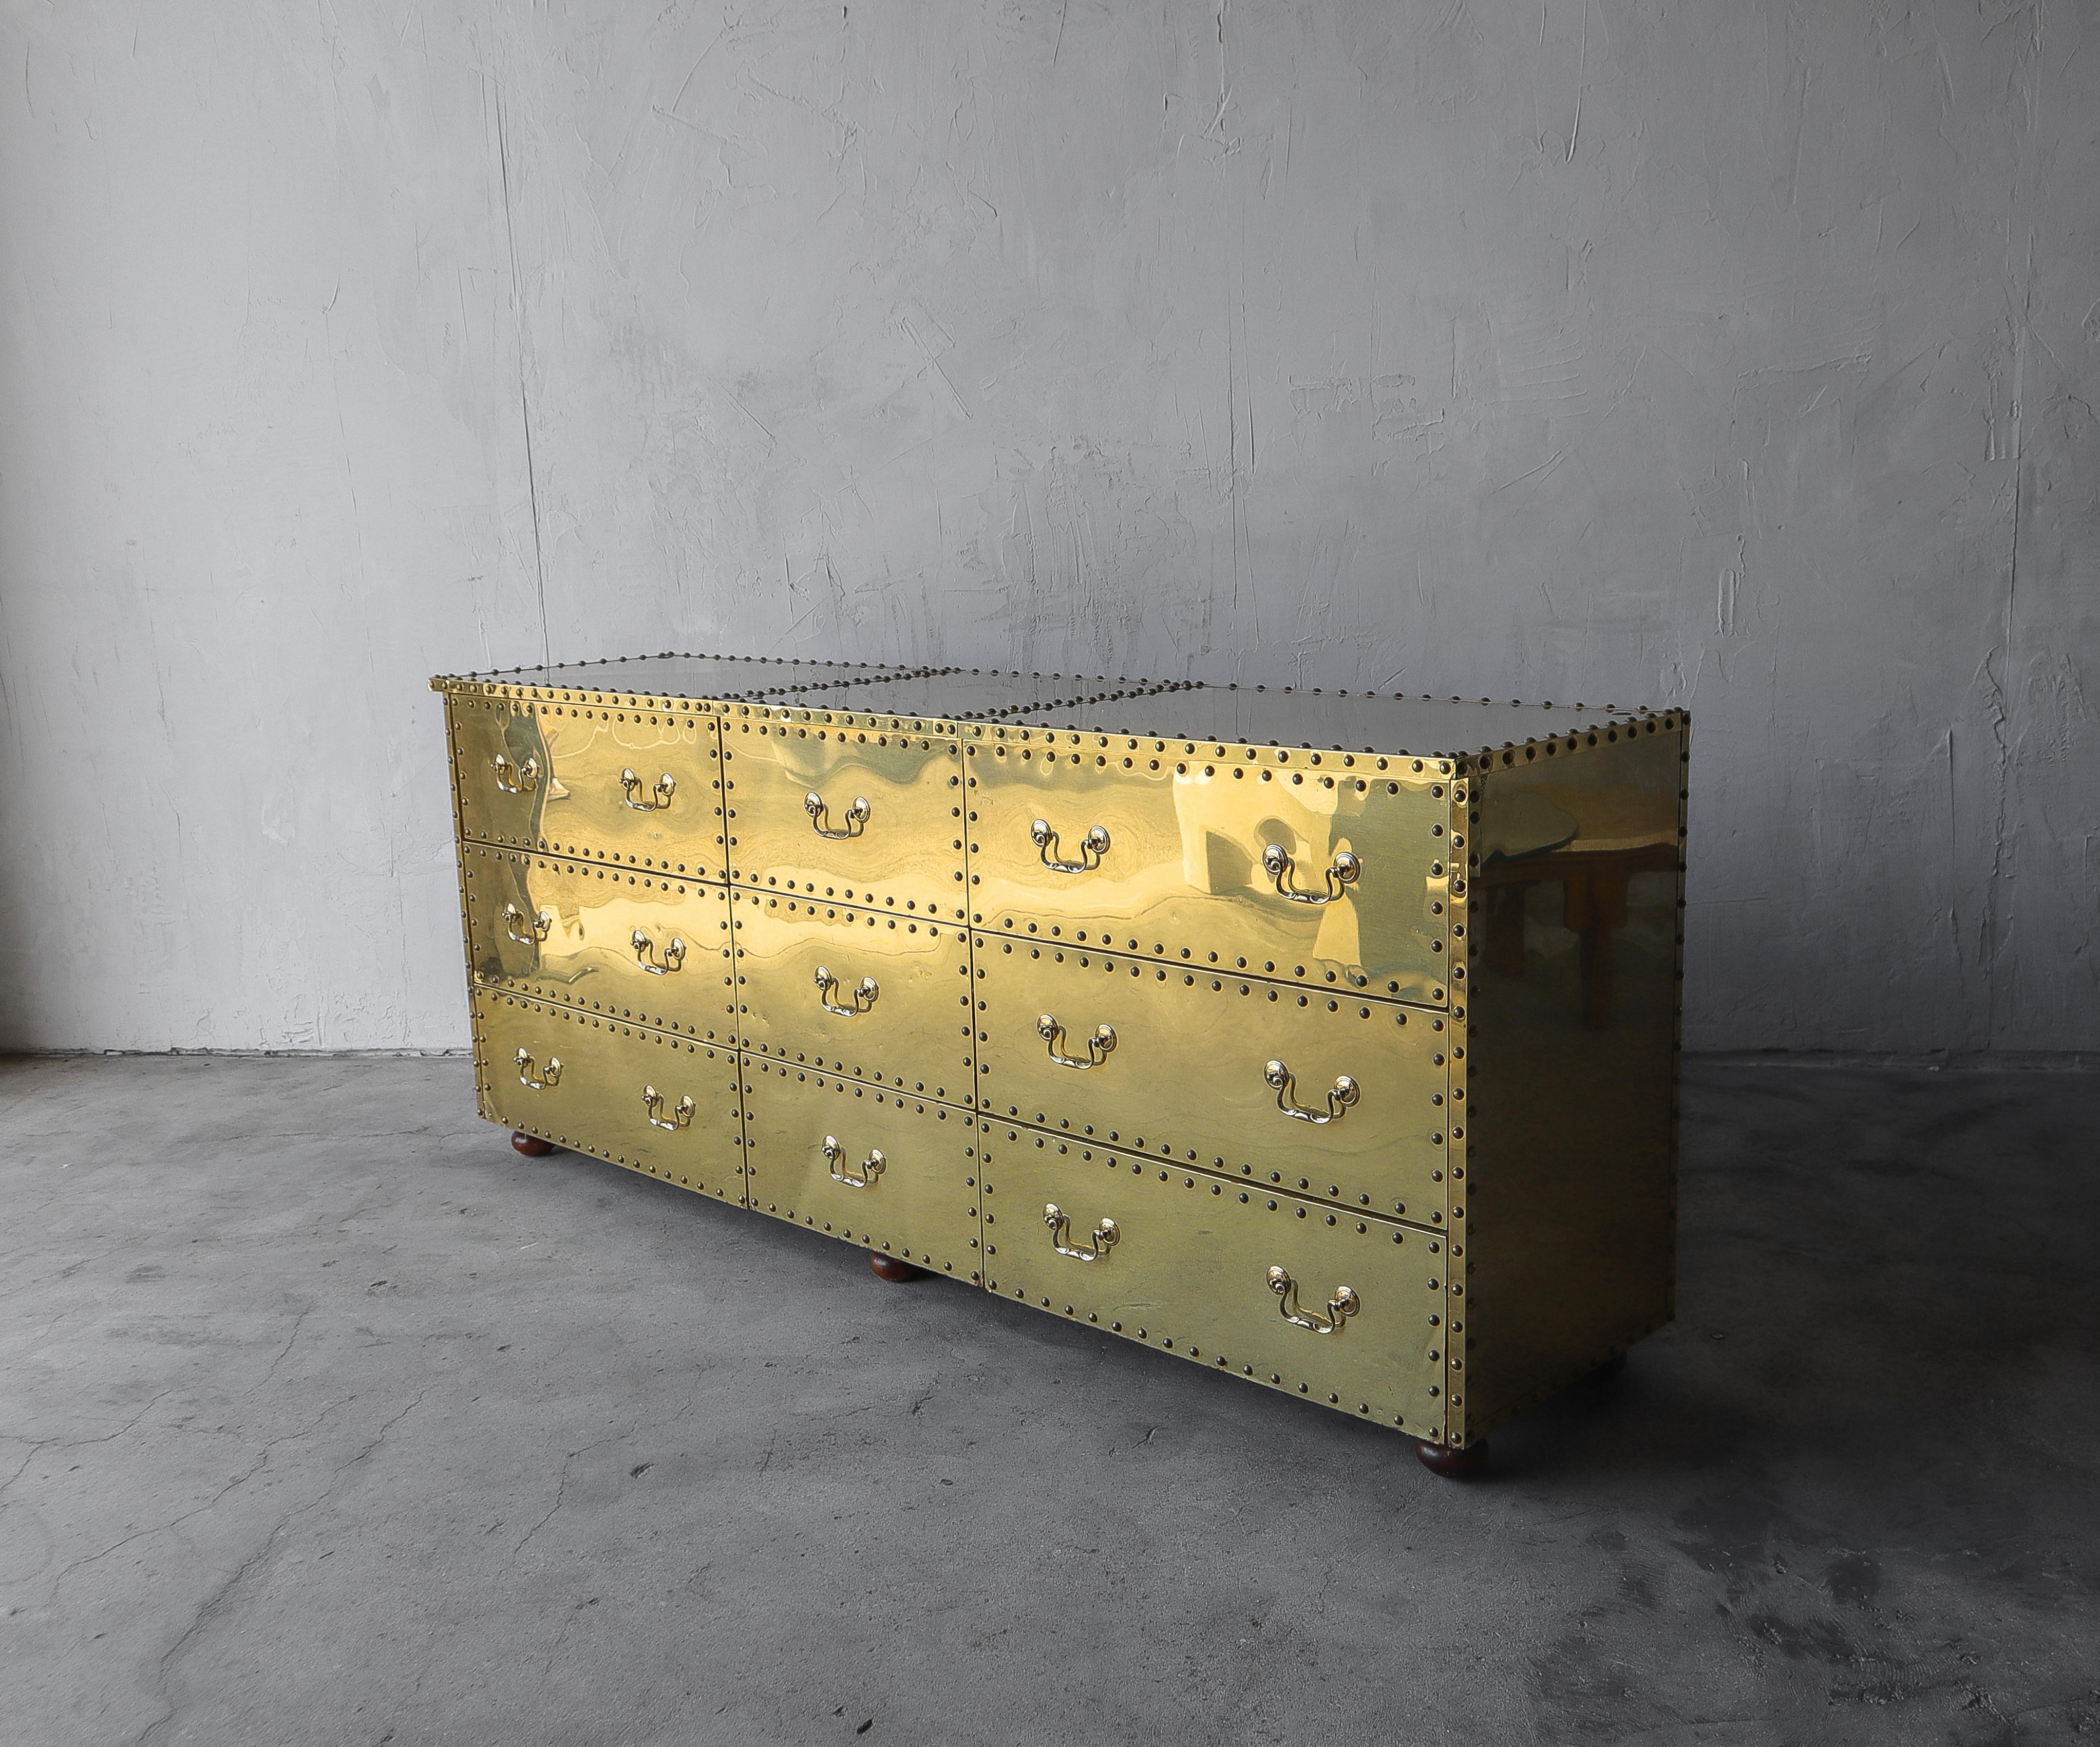 Love brass, look no further. The beautiful brass clad and riveted nine-drawer dresser by Sarreid Ltd.

Minor patina, dings, dents, and fine scratches from age and use, not perfect but overall pretty good condition, see images.

     
   